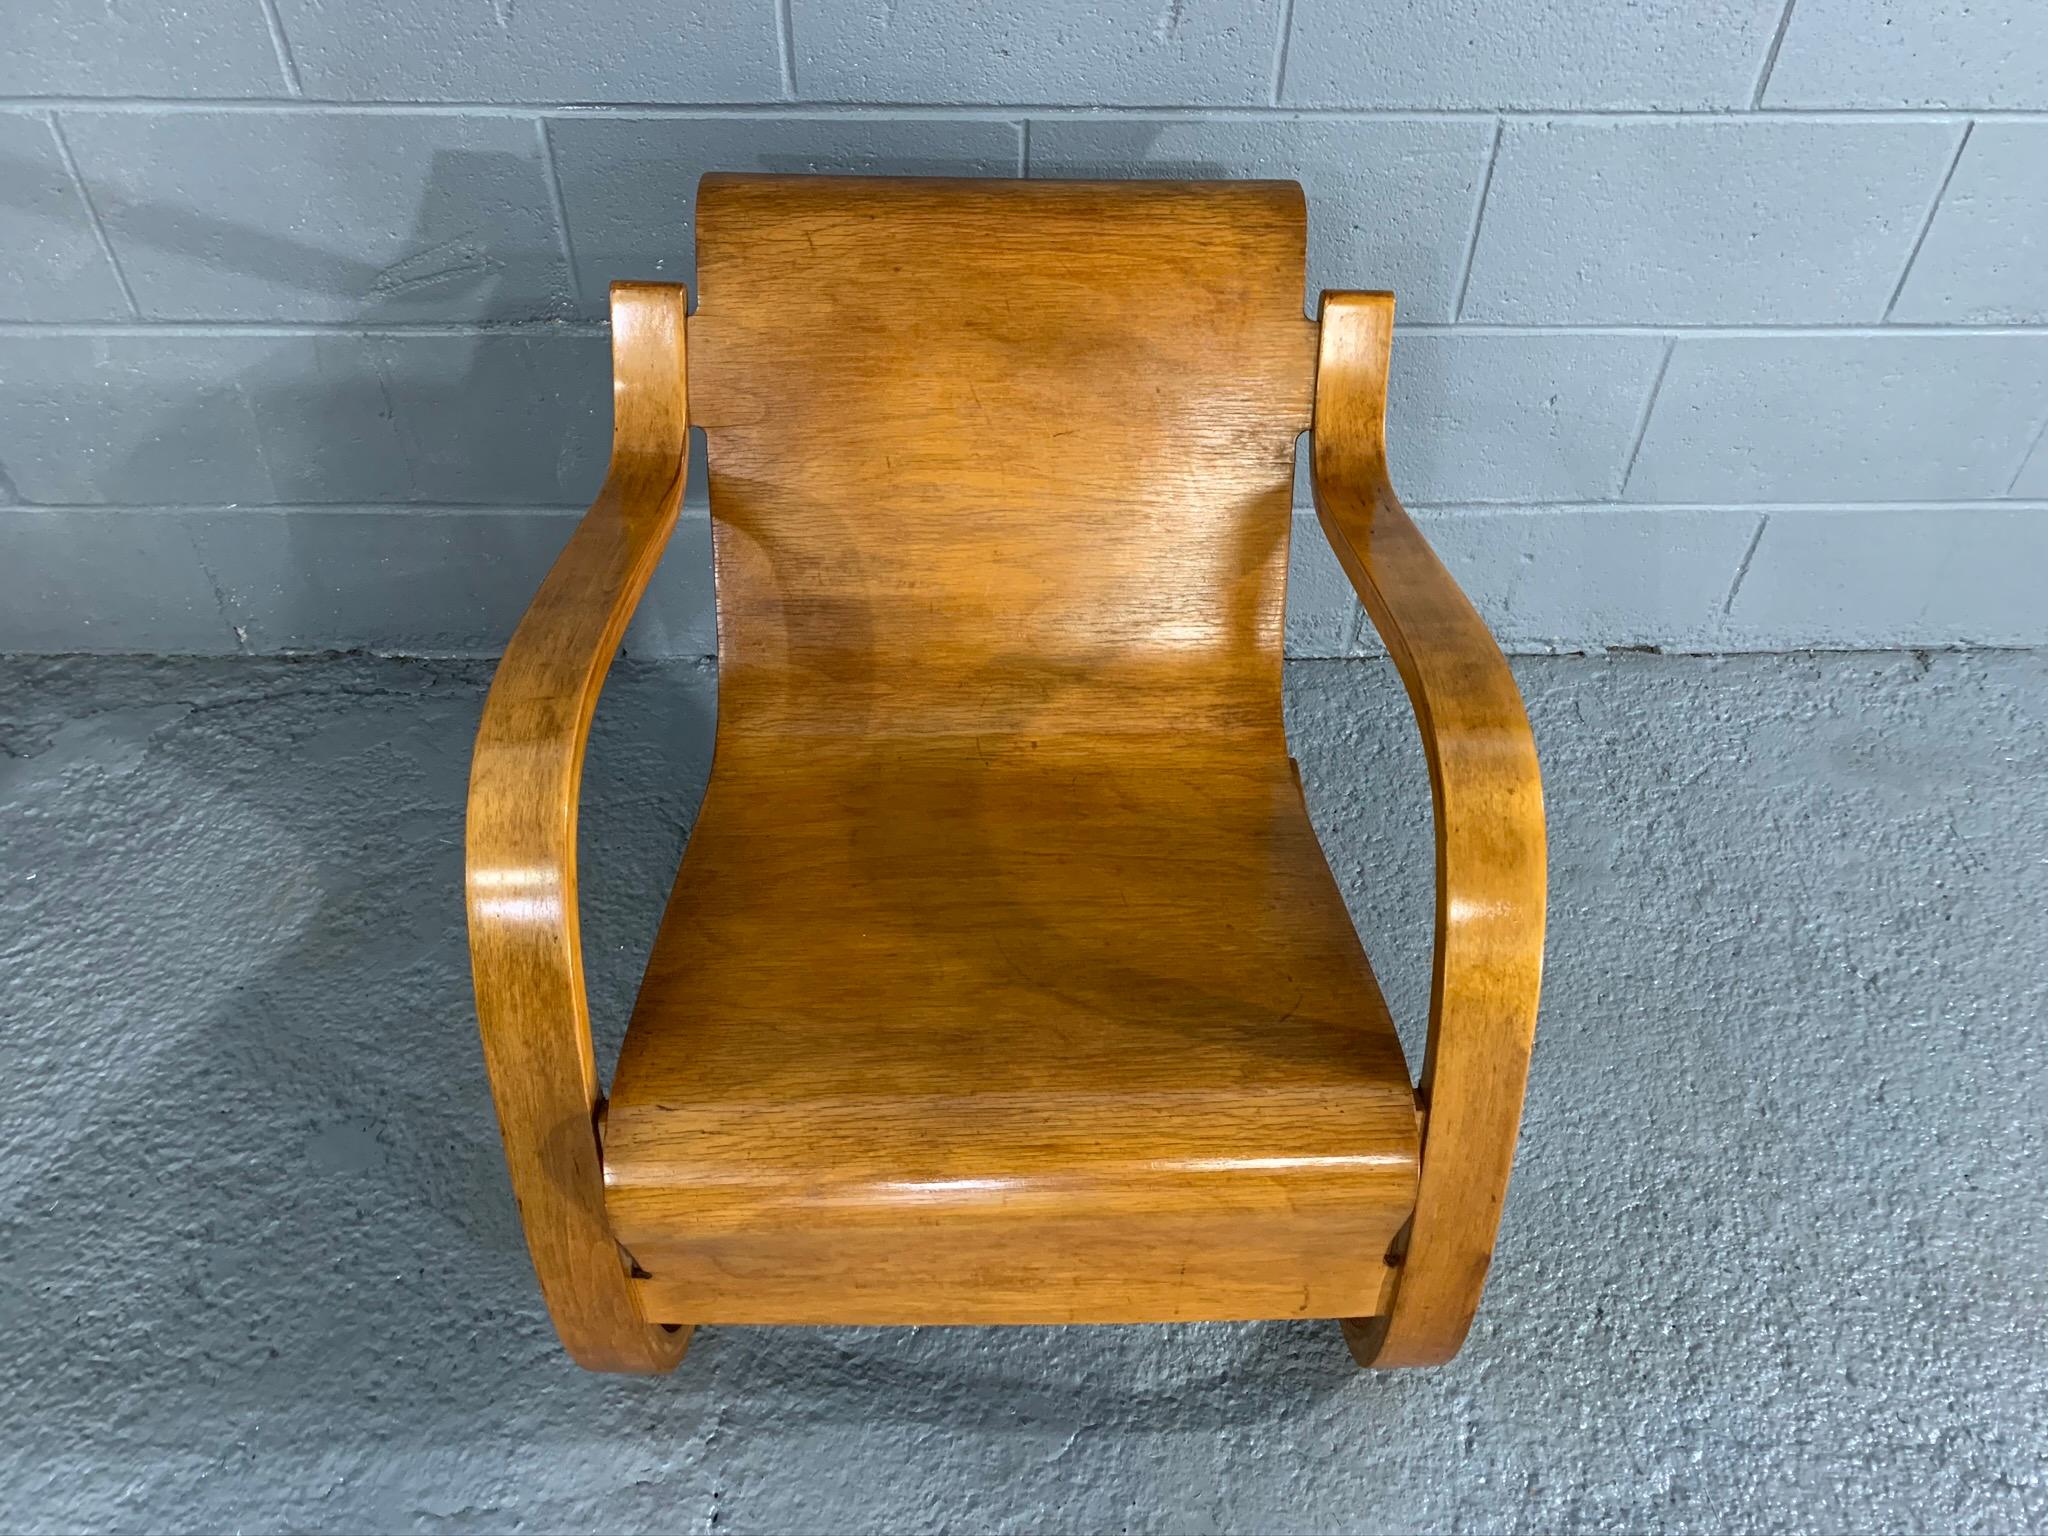 Rare midcentury Finnish lounge chair model 31/42 by Alvar Aalto, given the rich, deep patina of the chair's wood it appears to be a very early production example. This cantilevered lounge armchair model 31/42 is a Scandinavian Modern design icon by